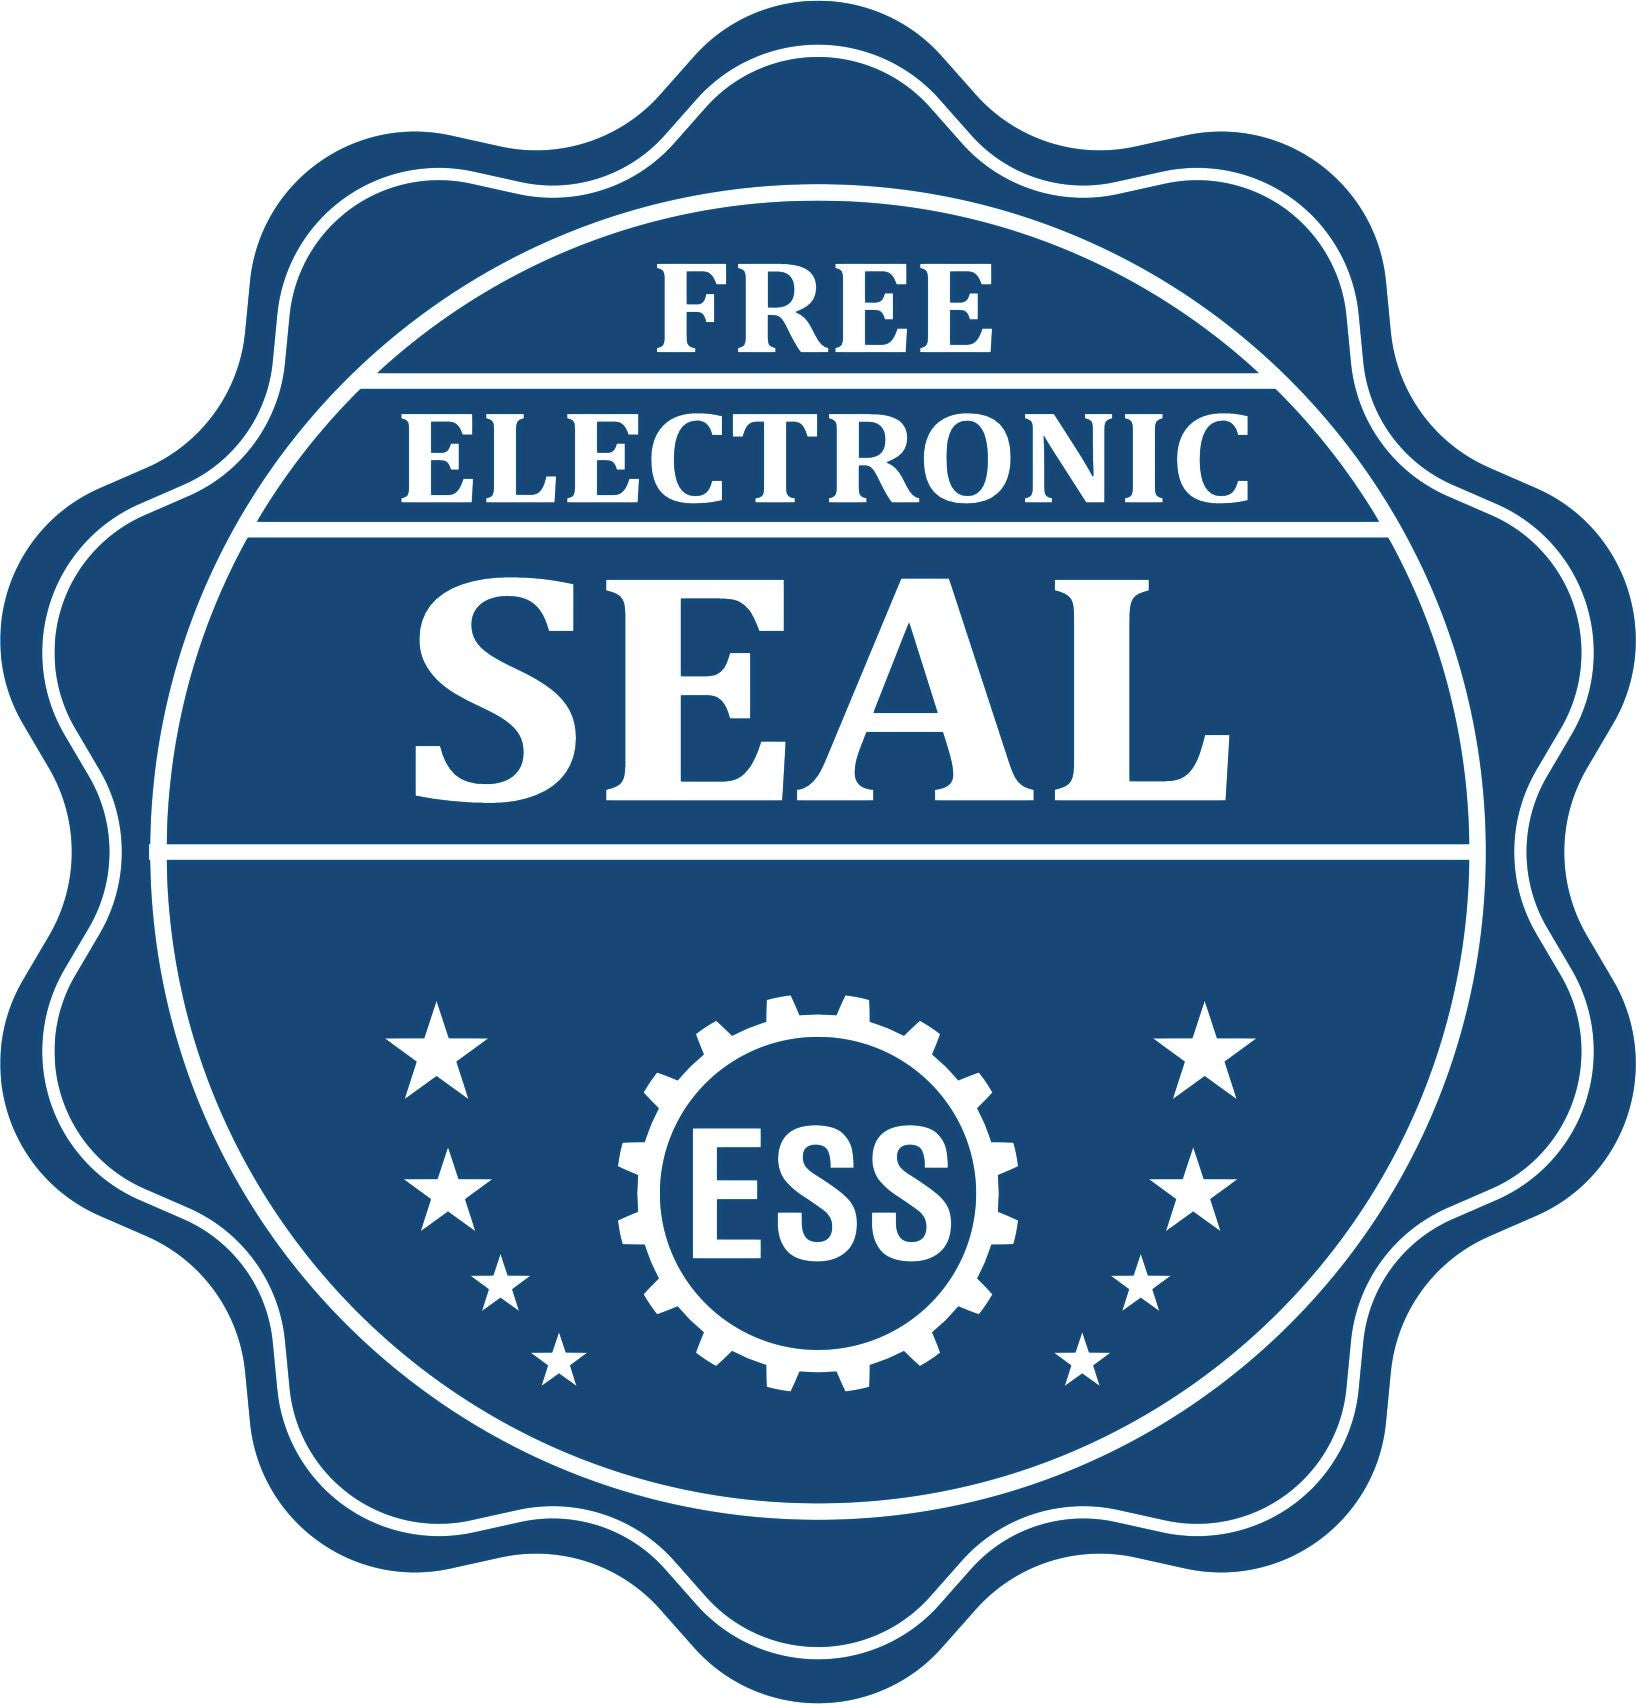 A badge showing a free electronic seal for the Handheld New Mexico Land Surveyor Seal with stars and the ESS gear on the emblem.